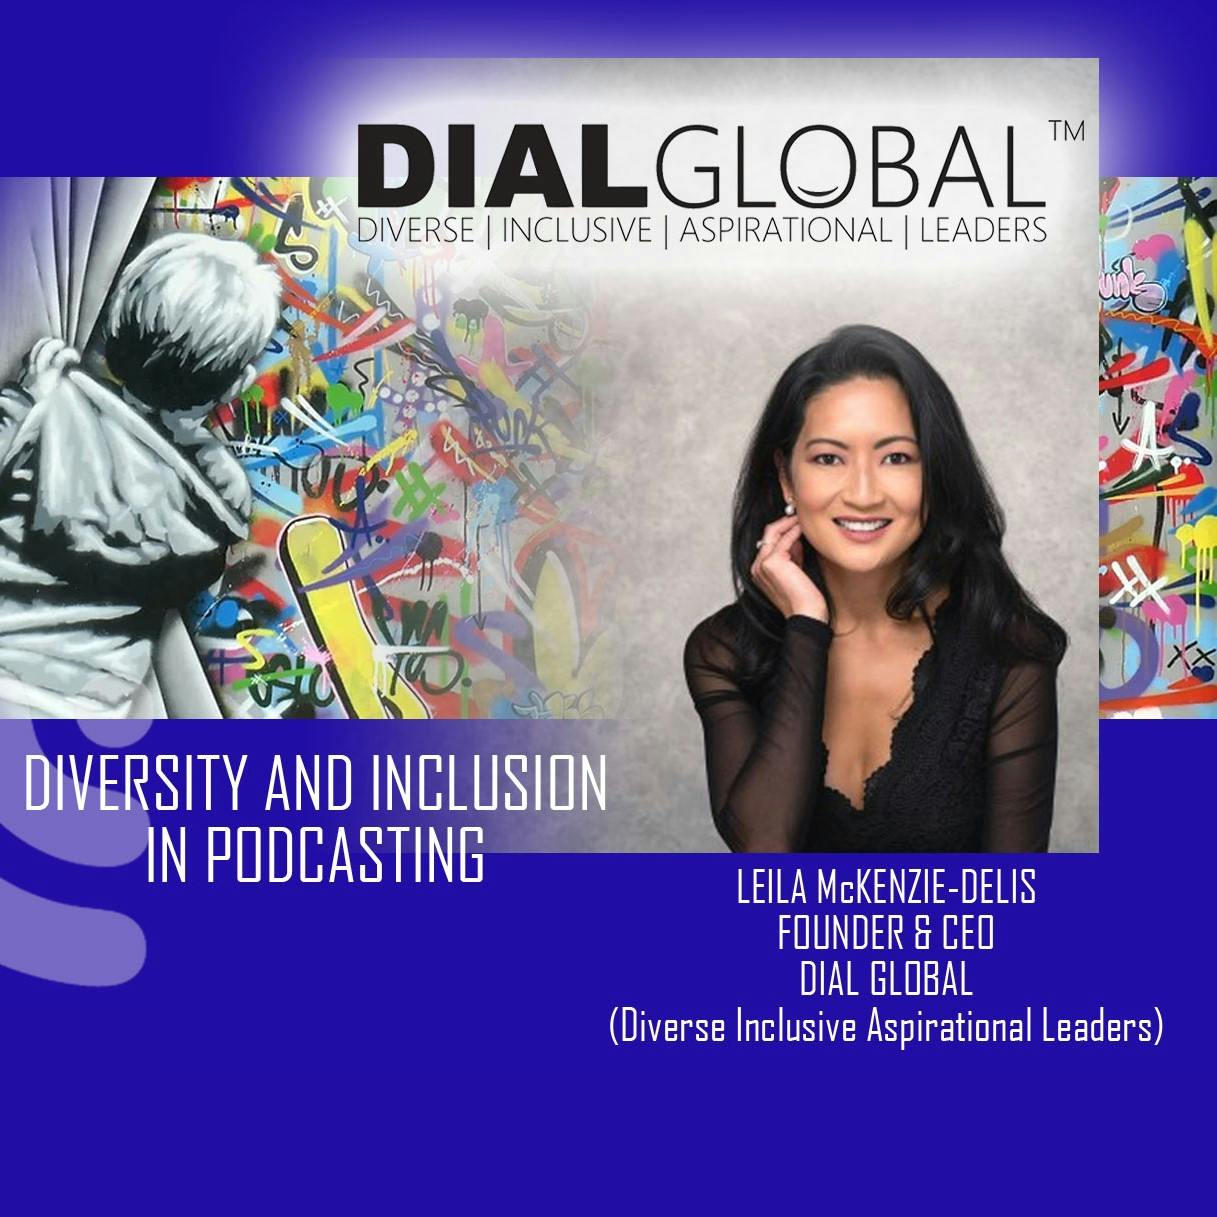 Podcast Futures: Diversity and Inclusion in Podcasting with Leila McKenzie-Delis, CEO Dial Global